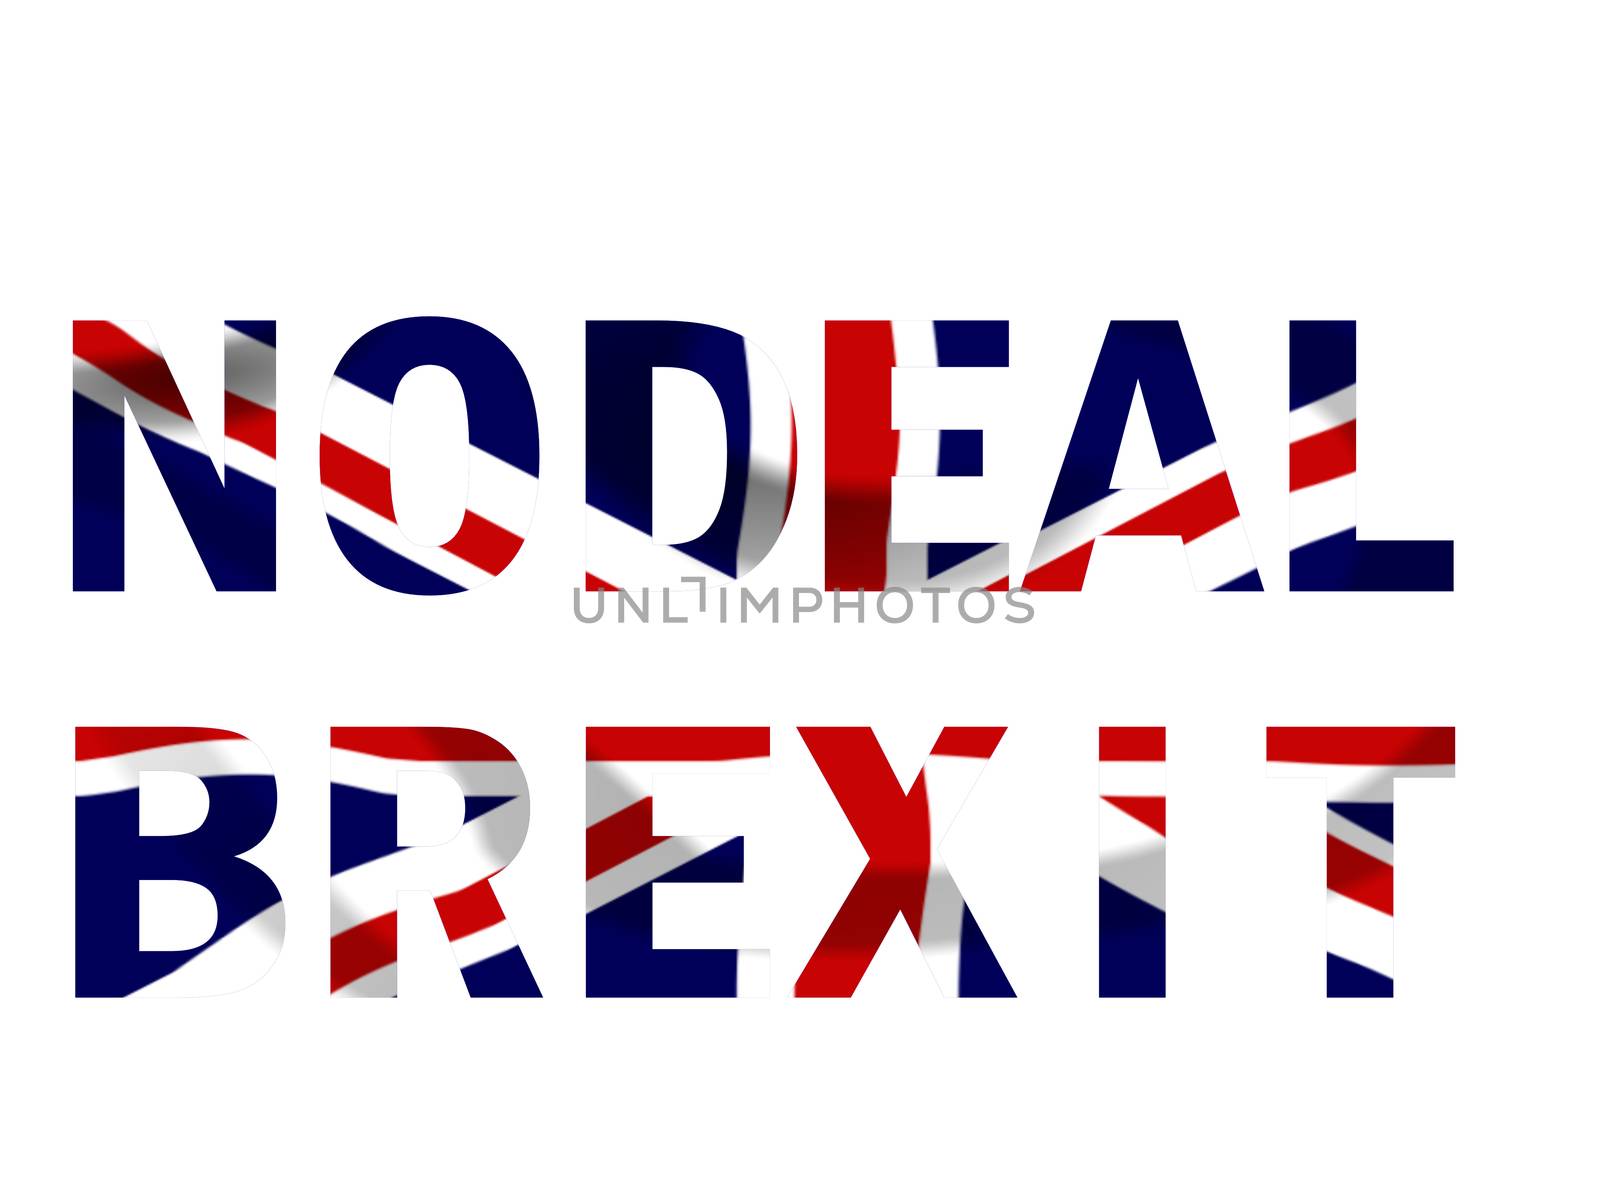 No Deal Brexit text in the colours of the Union Jack flag by magicbones